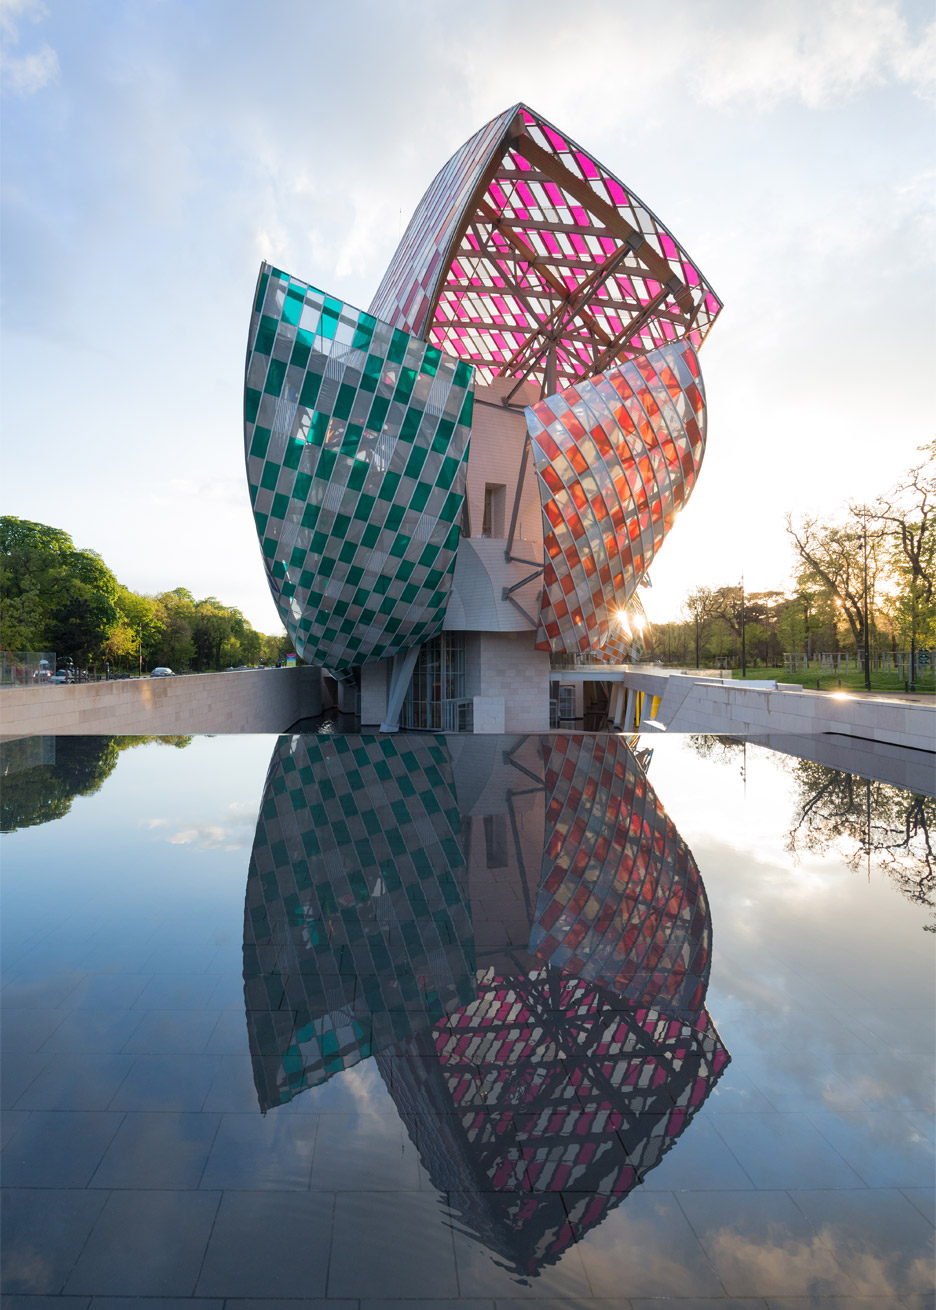 Observatory of Light multicoloured glass installation by Daniel Buren at the Fondation Louis Vuitton by Frank Gehry in Paris, France